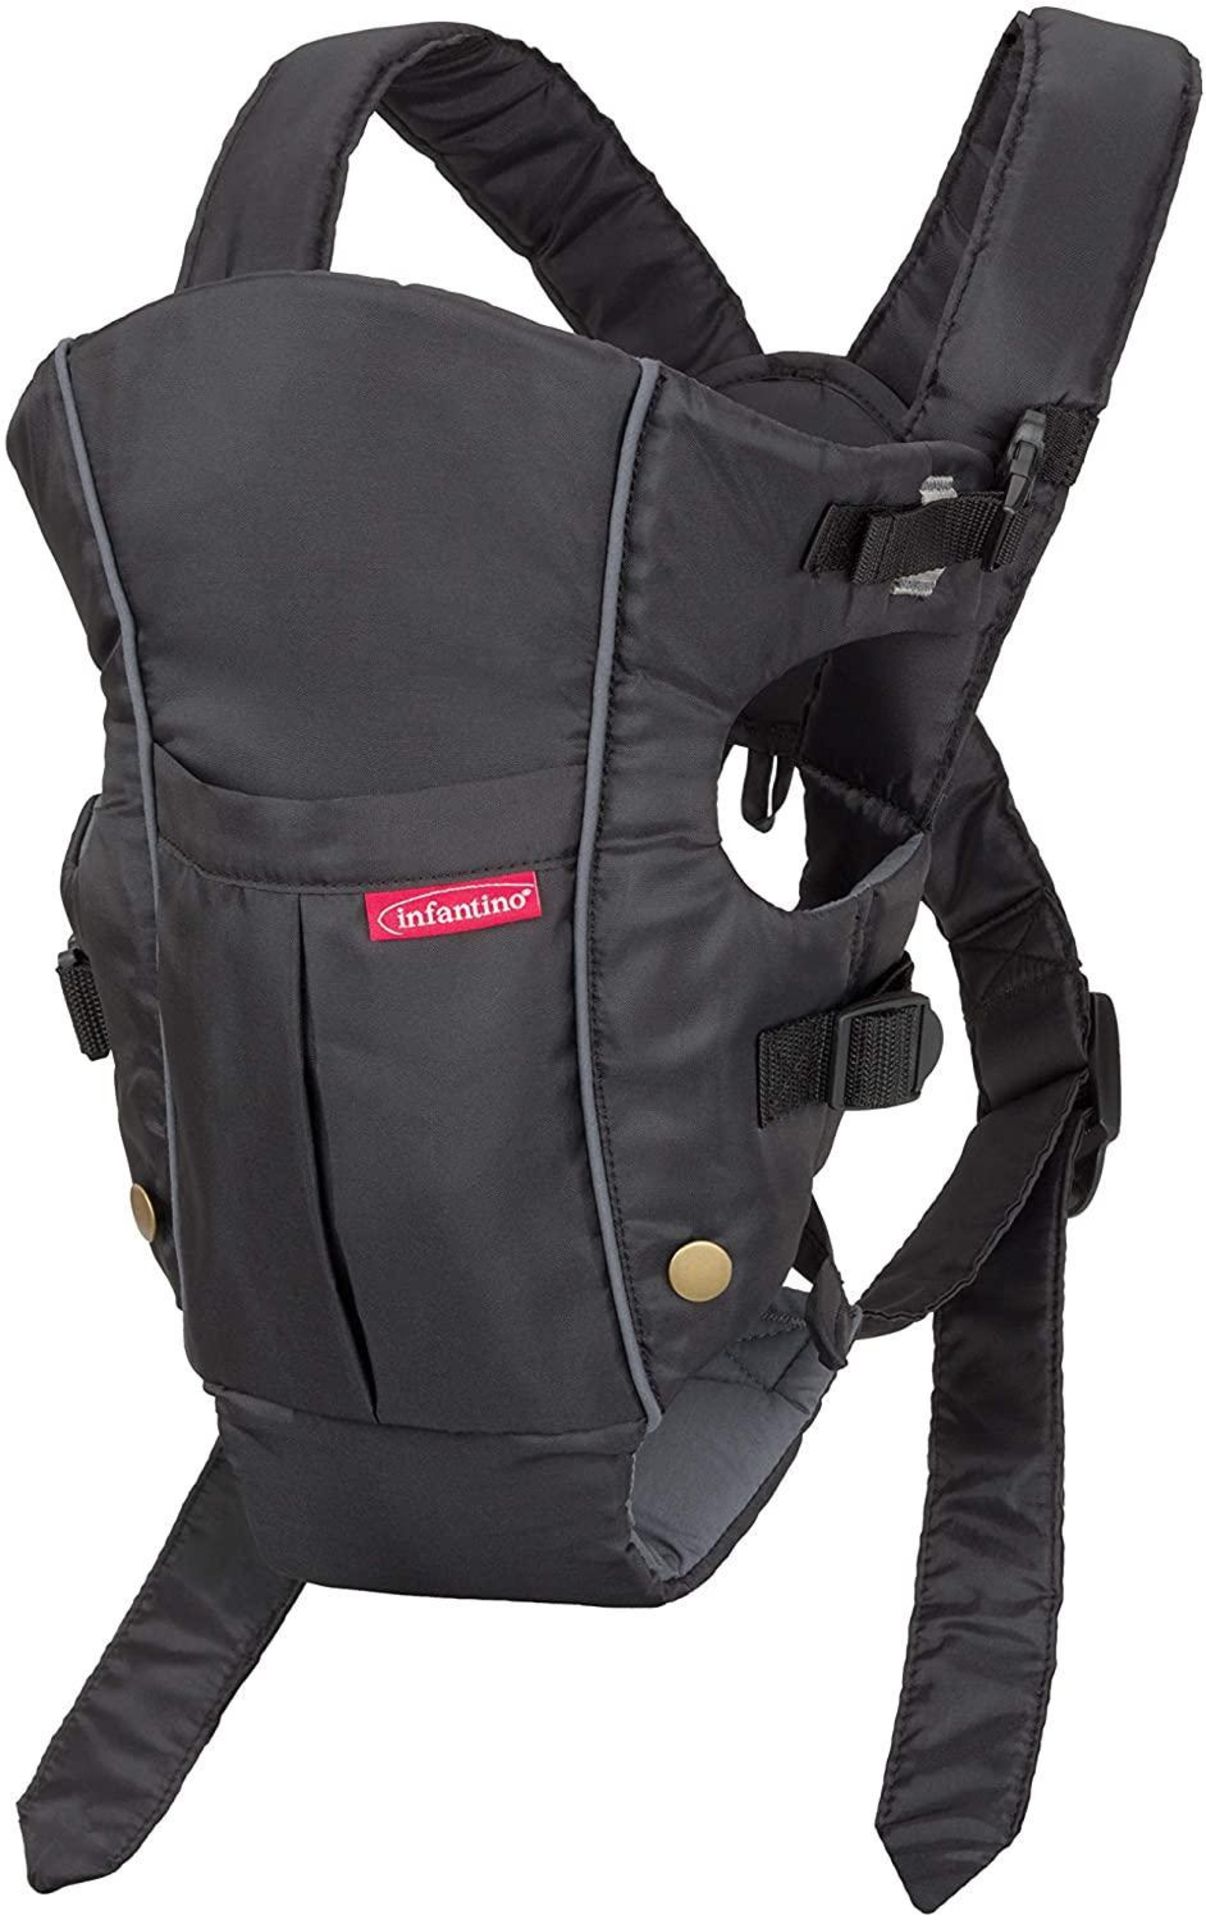 Infantino Swift Classic Carrier - 200204, Black £19.99 RRP